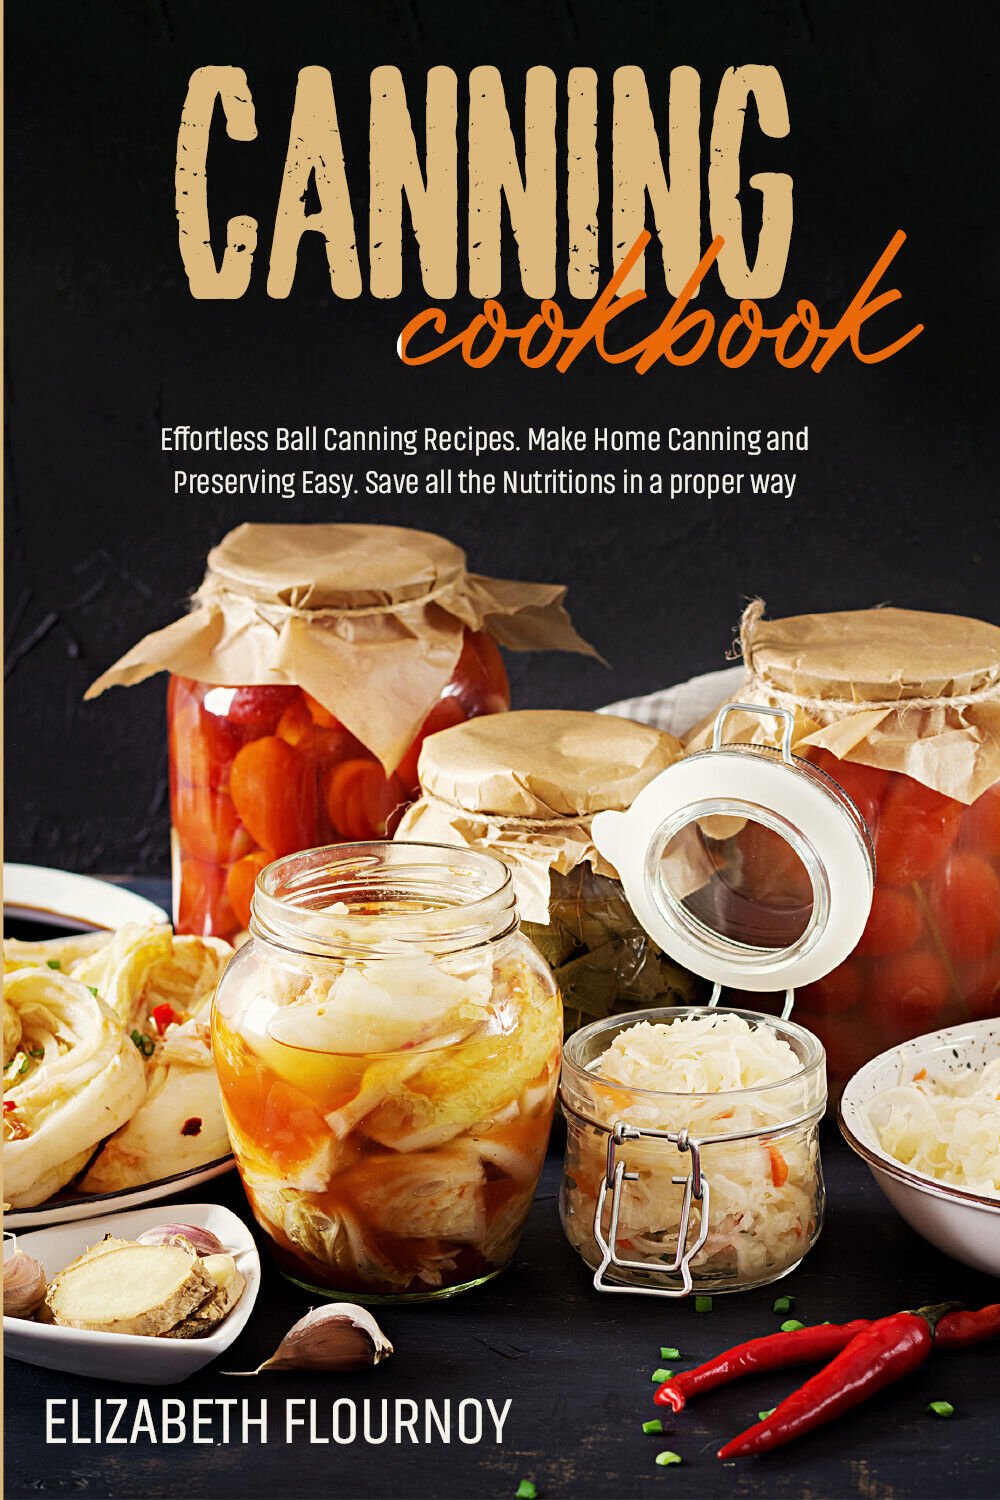 Canning cookbook. Effortless Ball Canning Recipes. Make Home Canning and Preserv